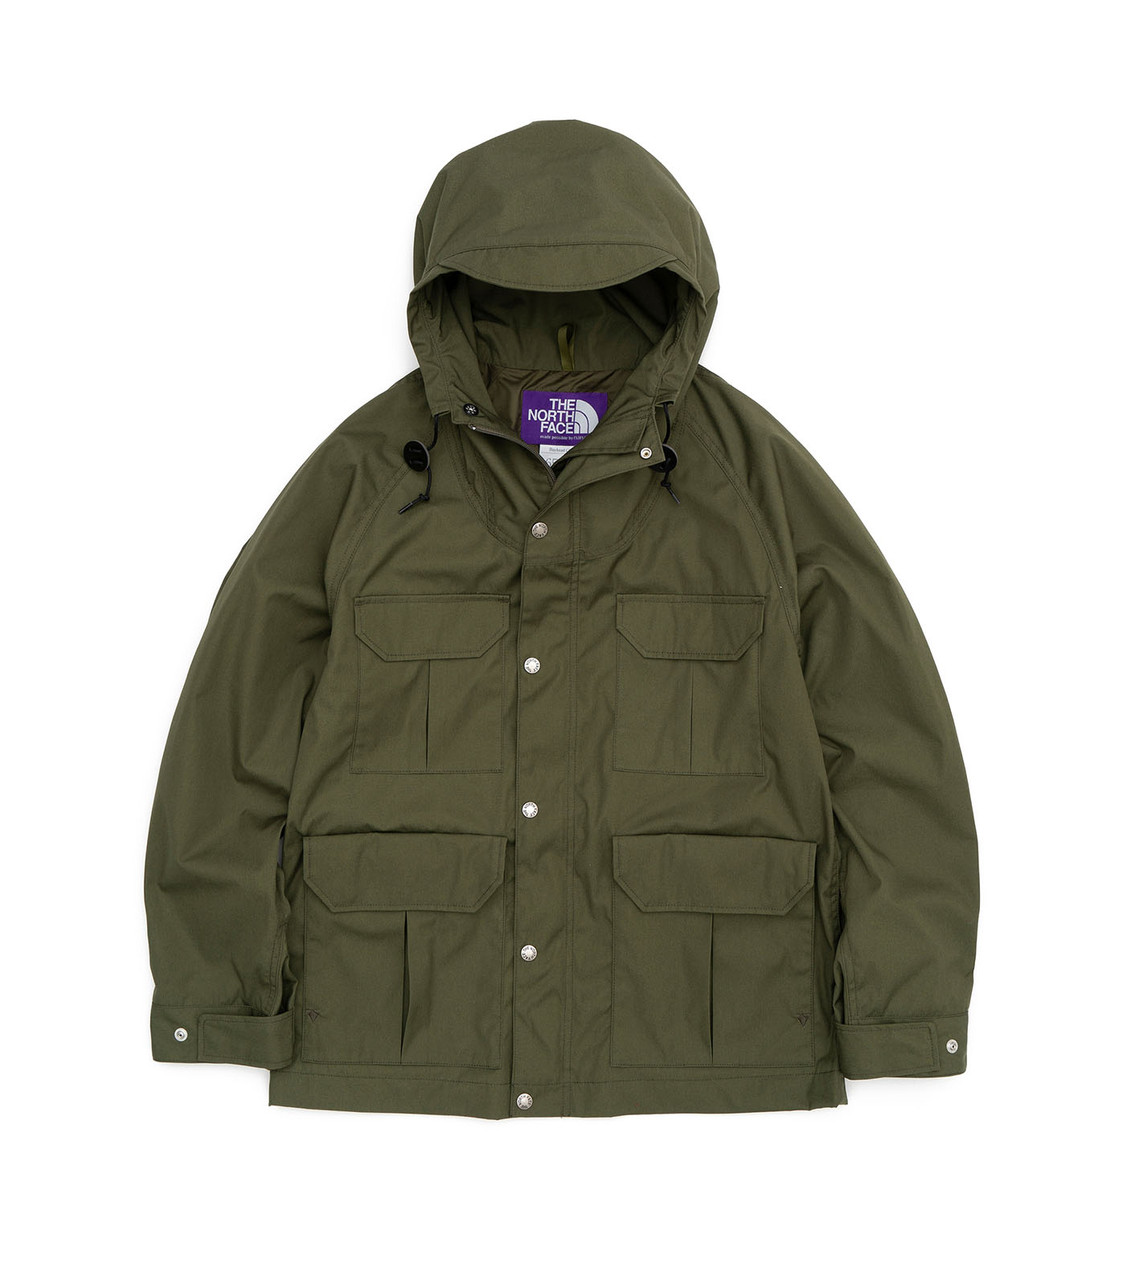 THE NORTH FACE PURPLE LABEL 65/35 Mountain Parka NP2051N 6298